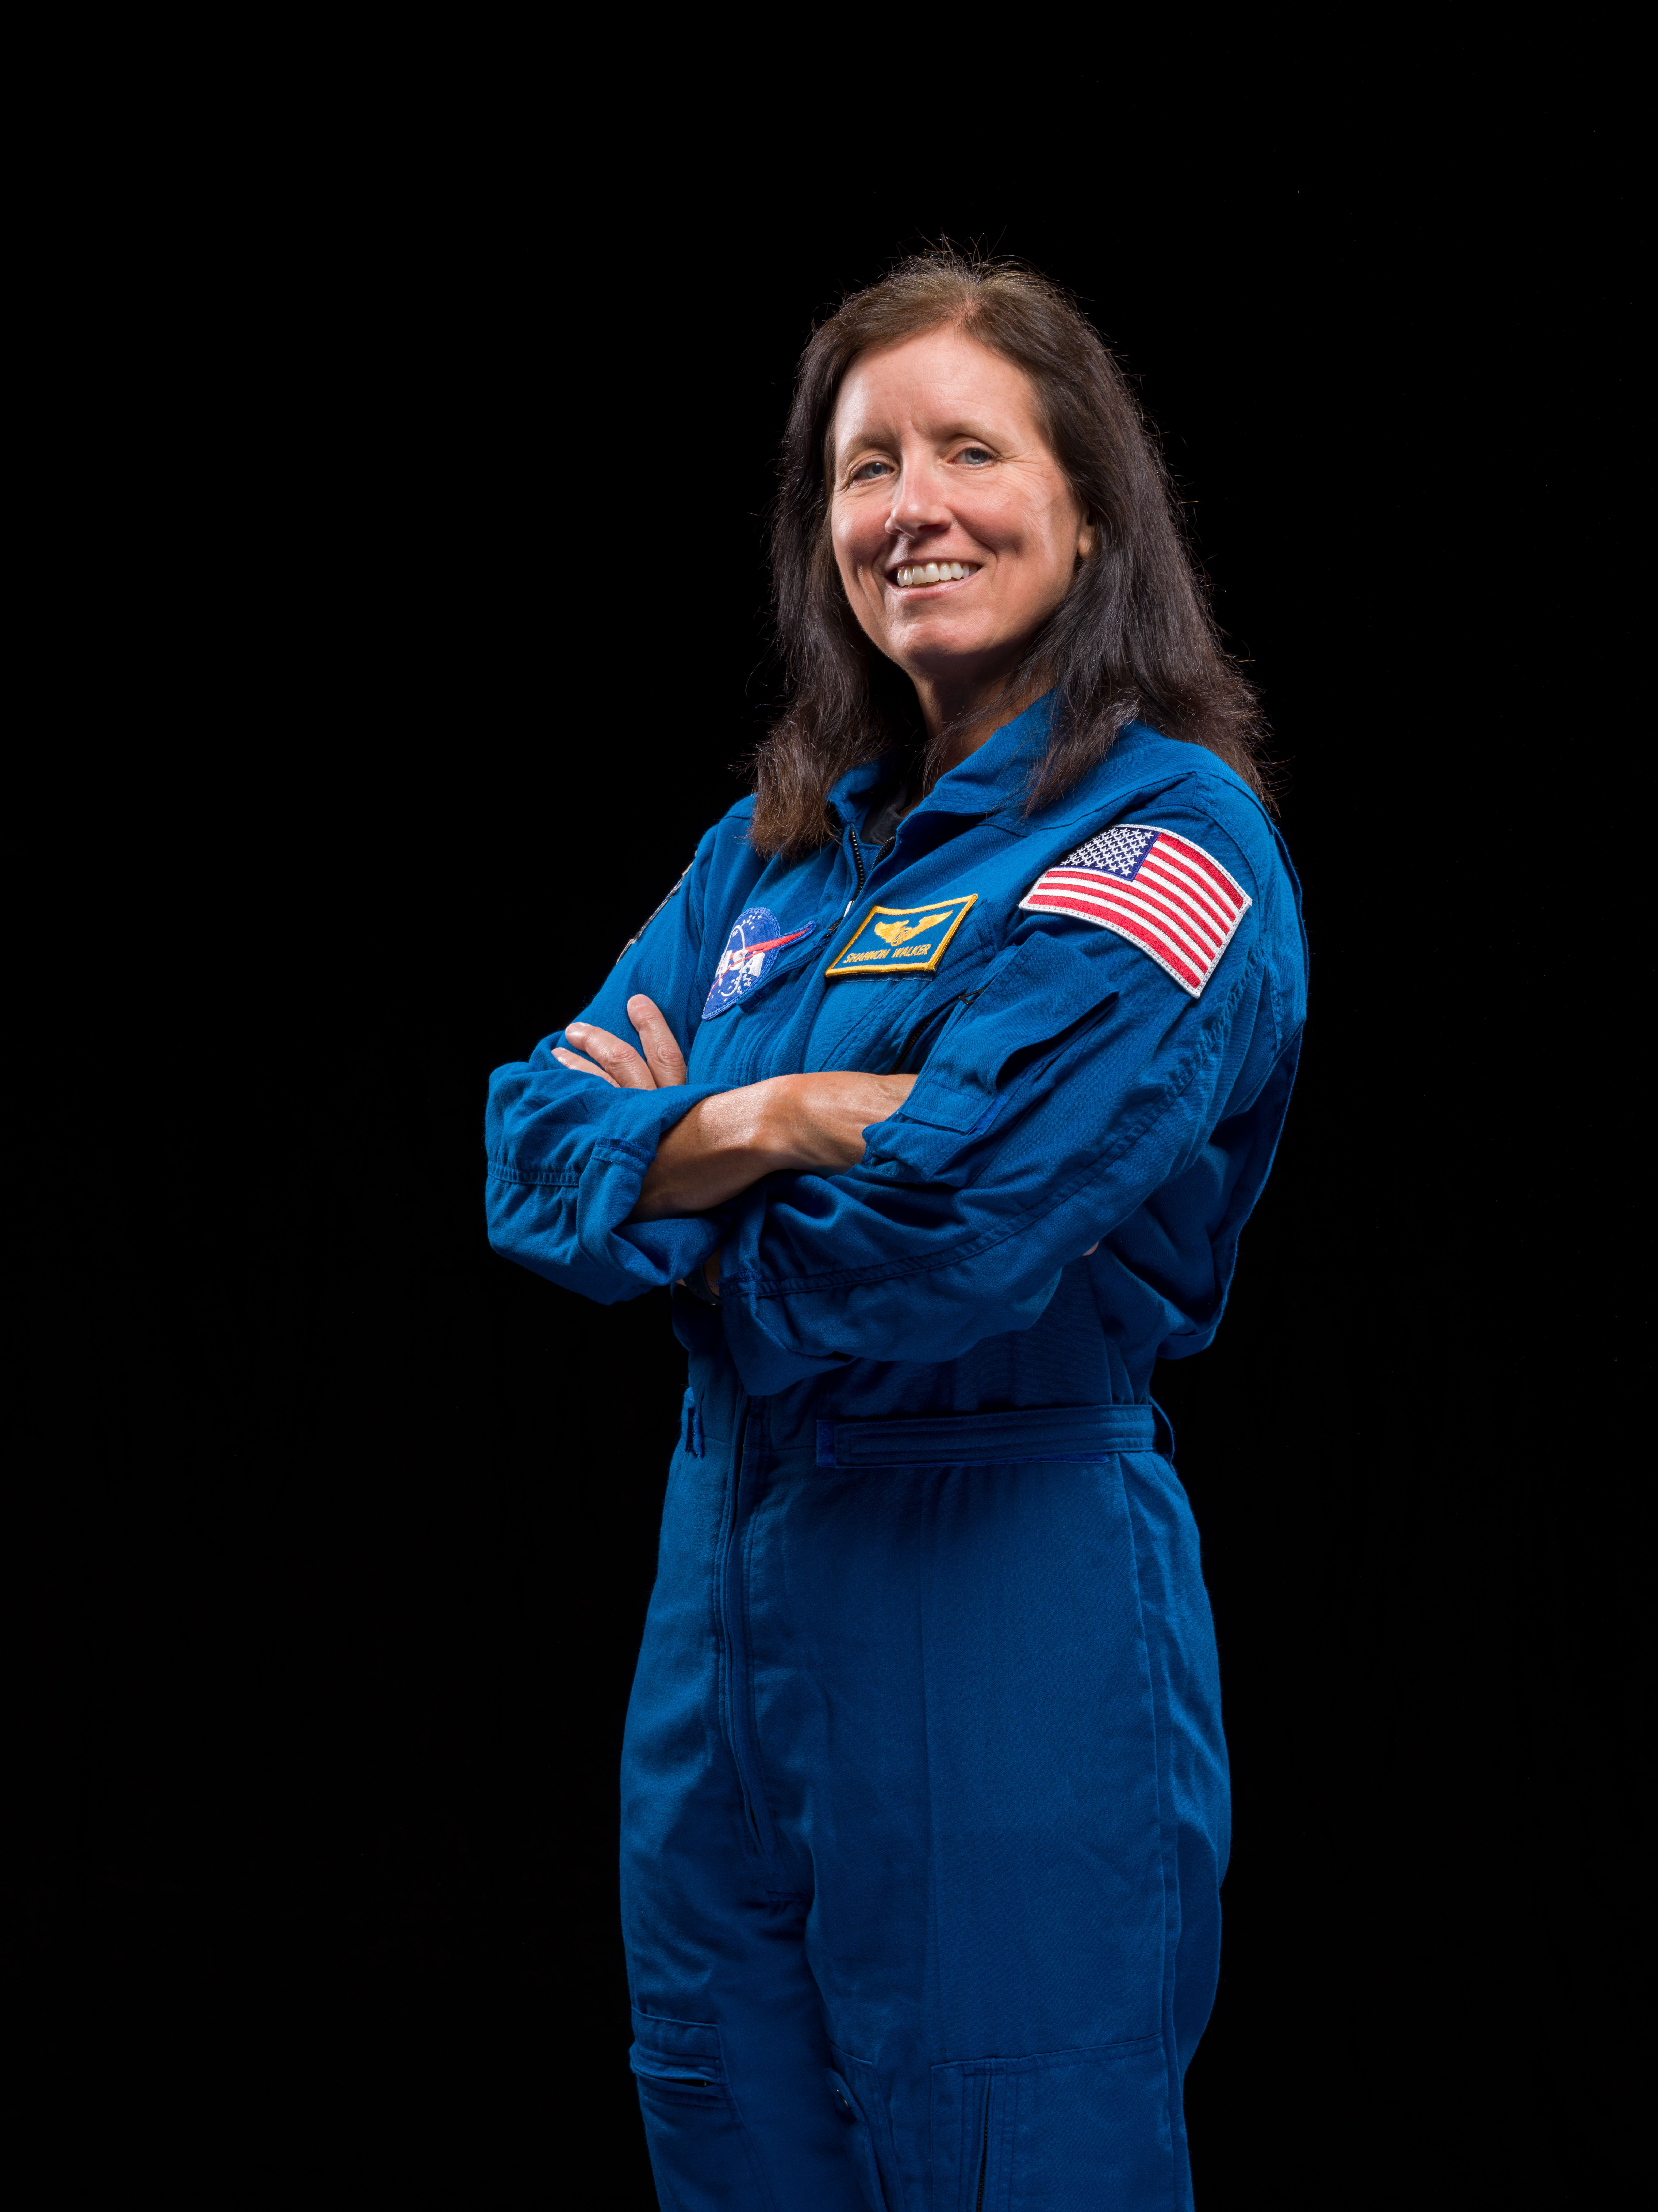 NASA's SpaceX Crew-1 Mission Specialist Shannon Walker is photographed in her blue NASA flight suit.